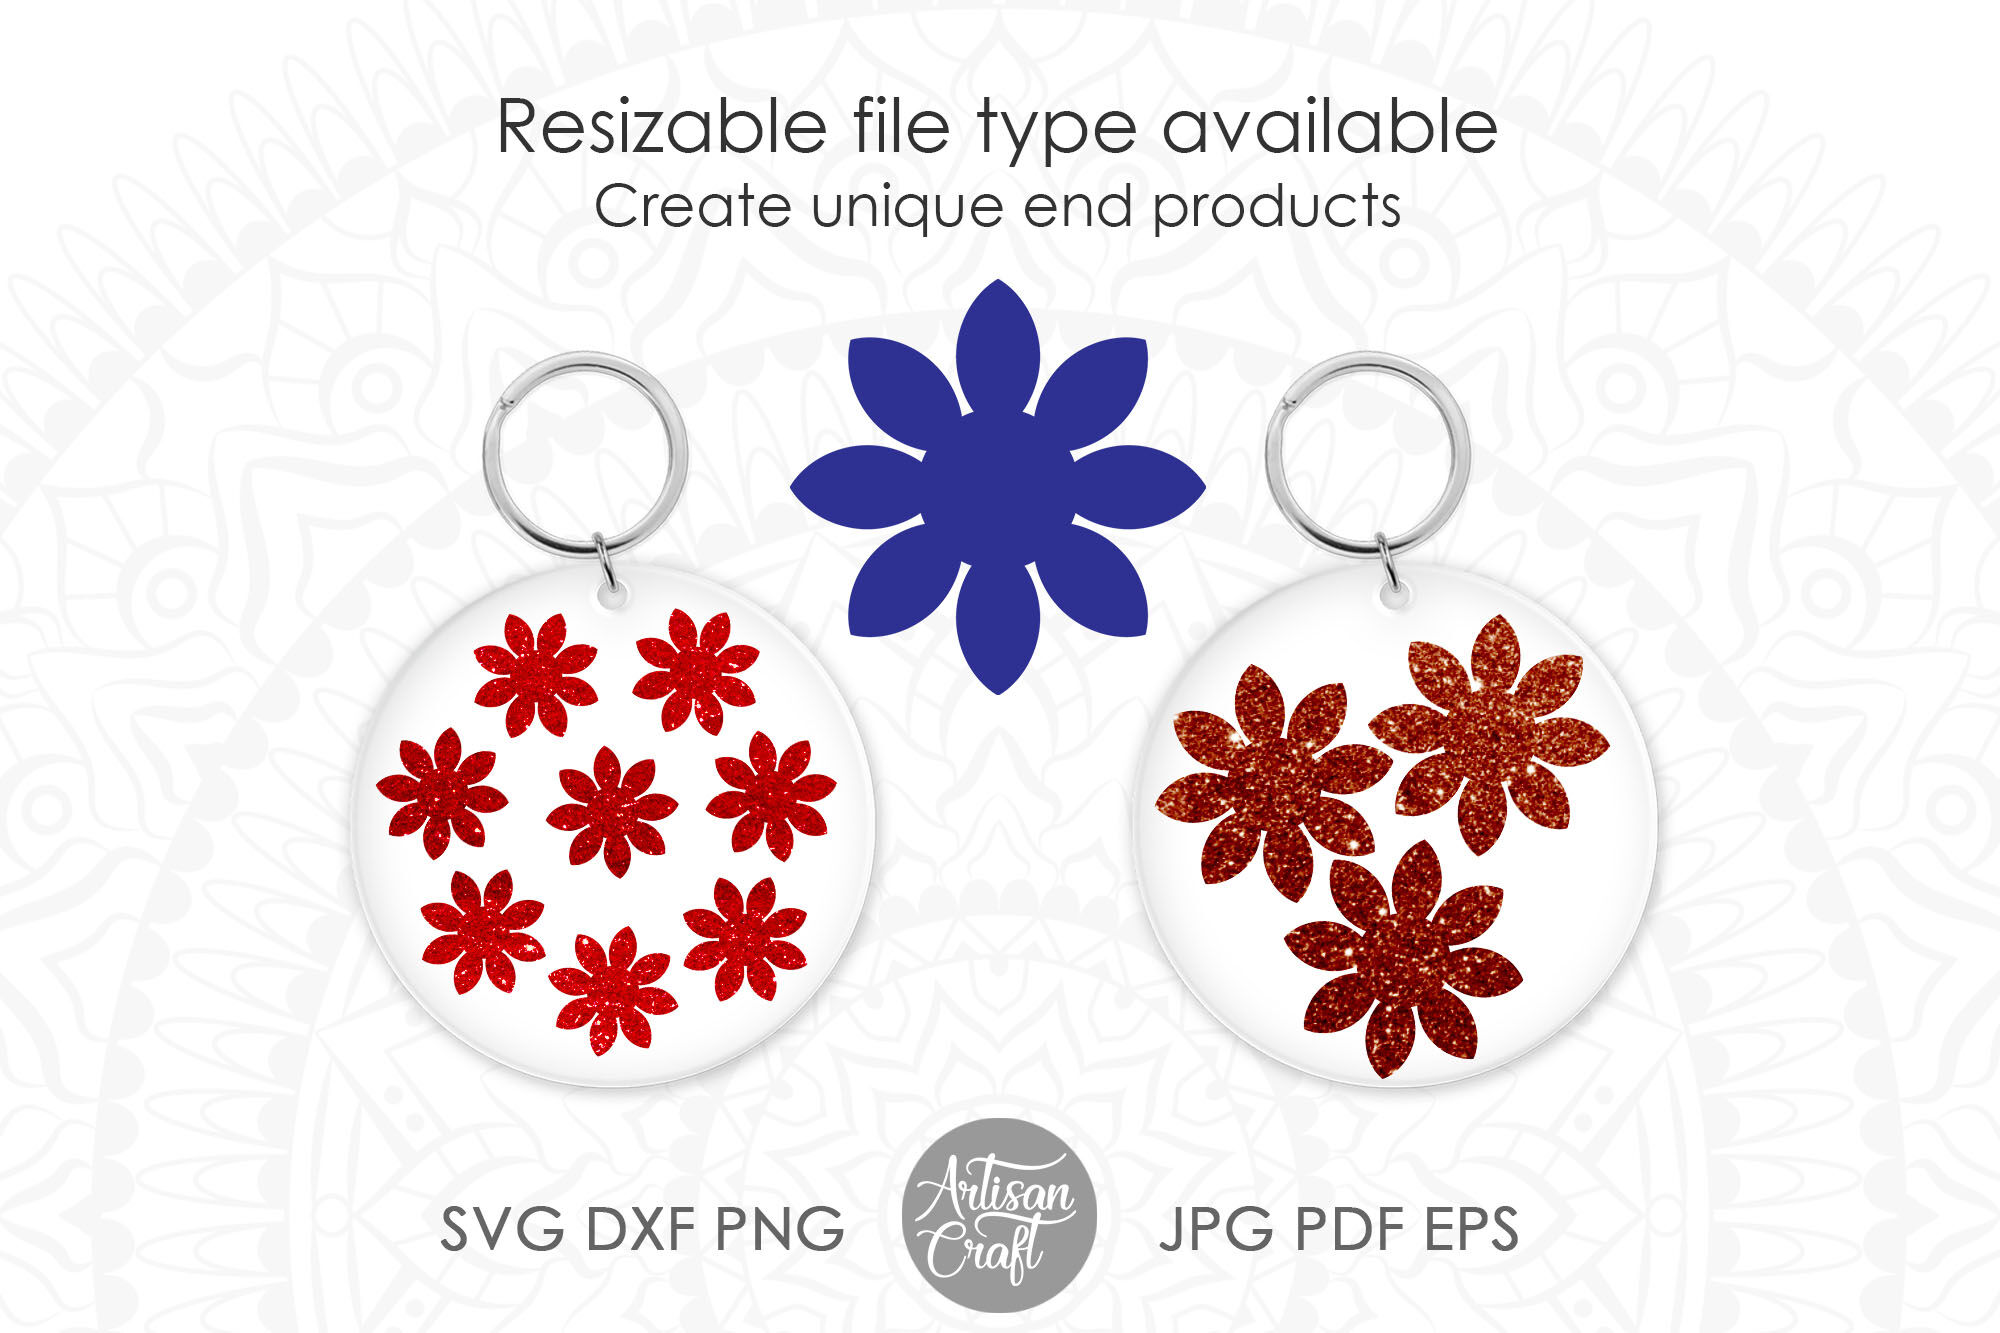 Download Floral Keychain Svg Floral Shapes Keychain Background By Artisan Craft Svg Thehungryjpeg Com